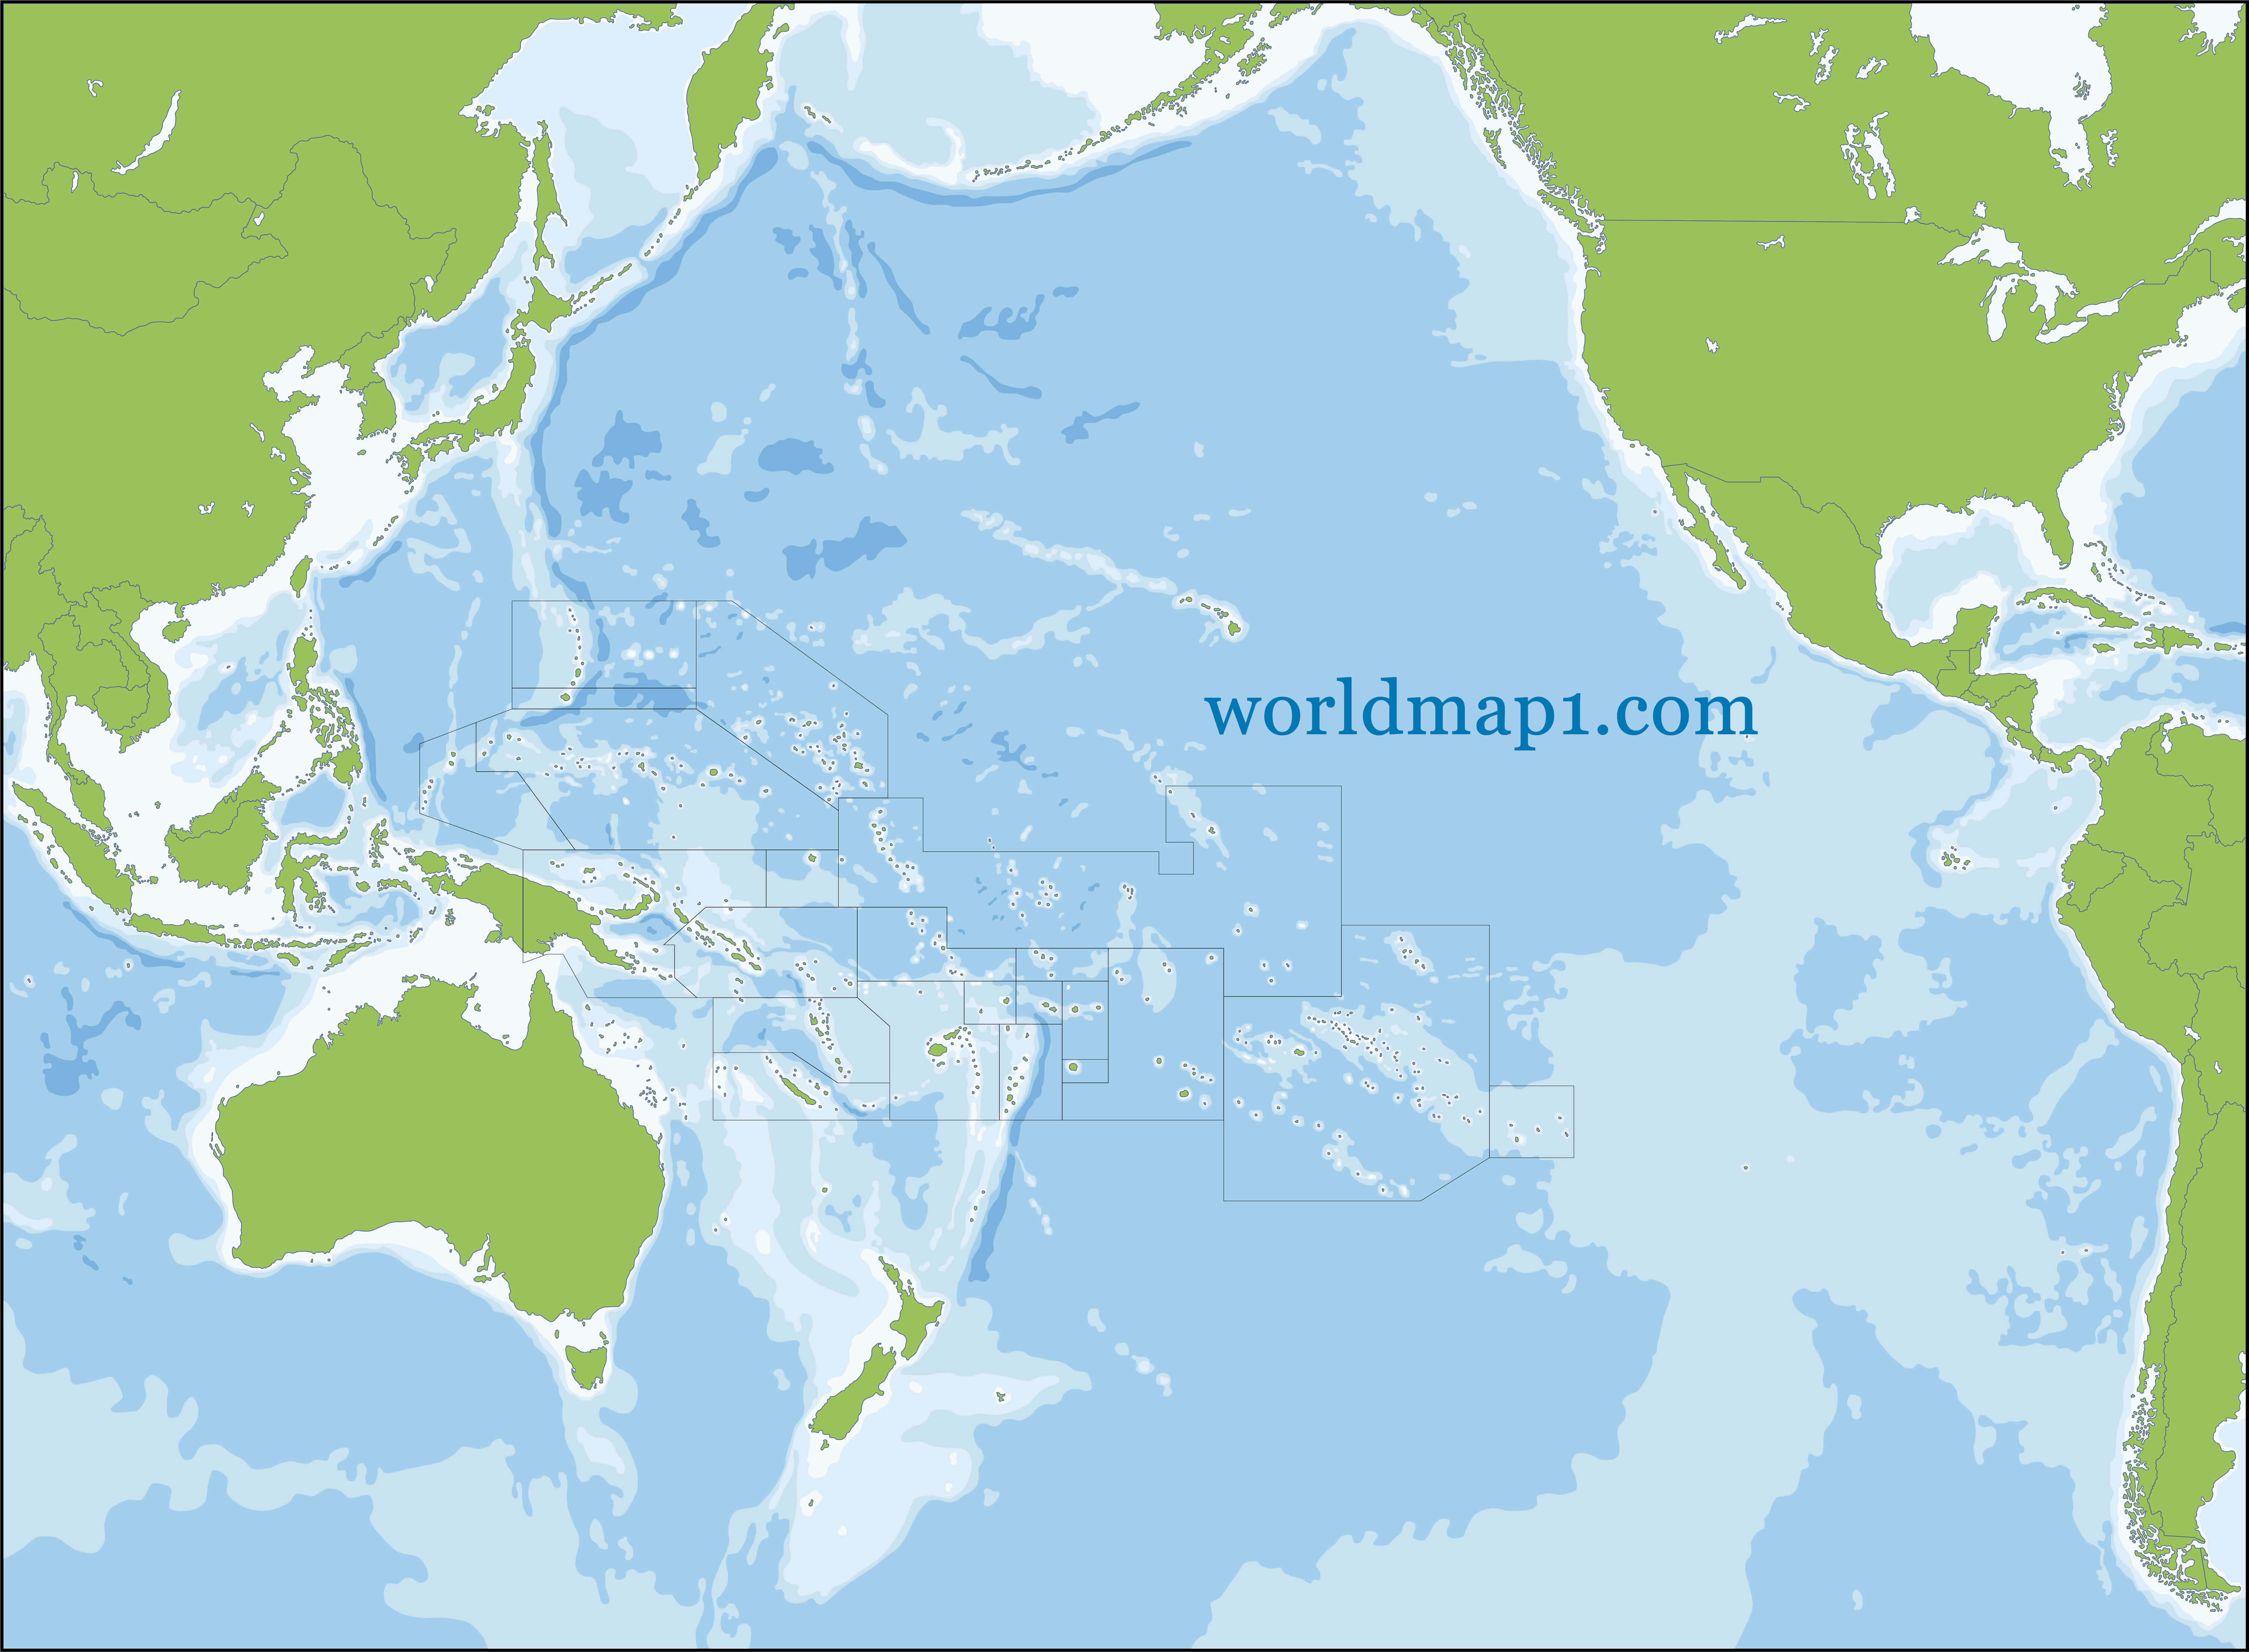 Map of Oceania and Pacific Ocean